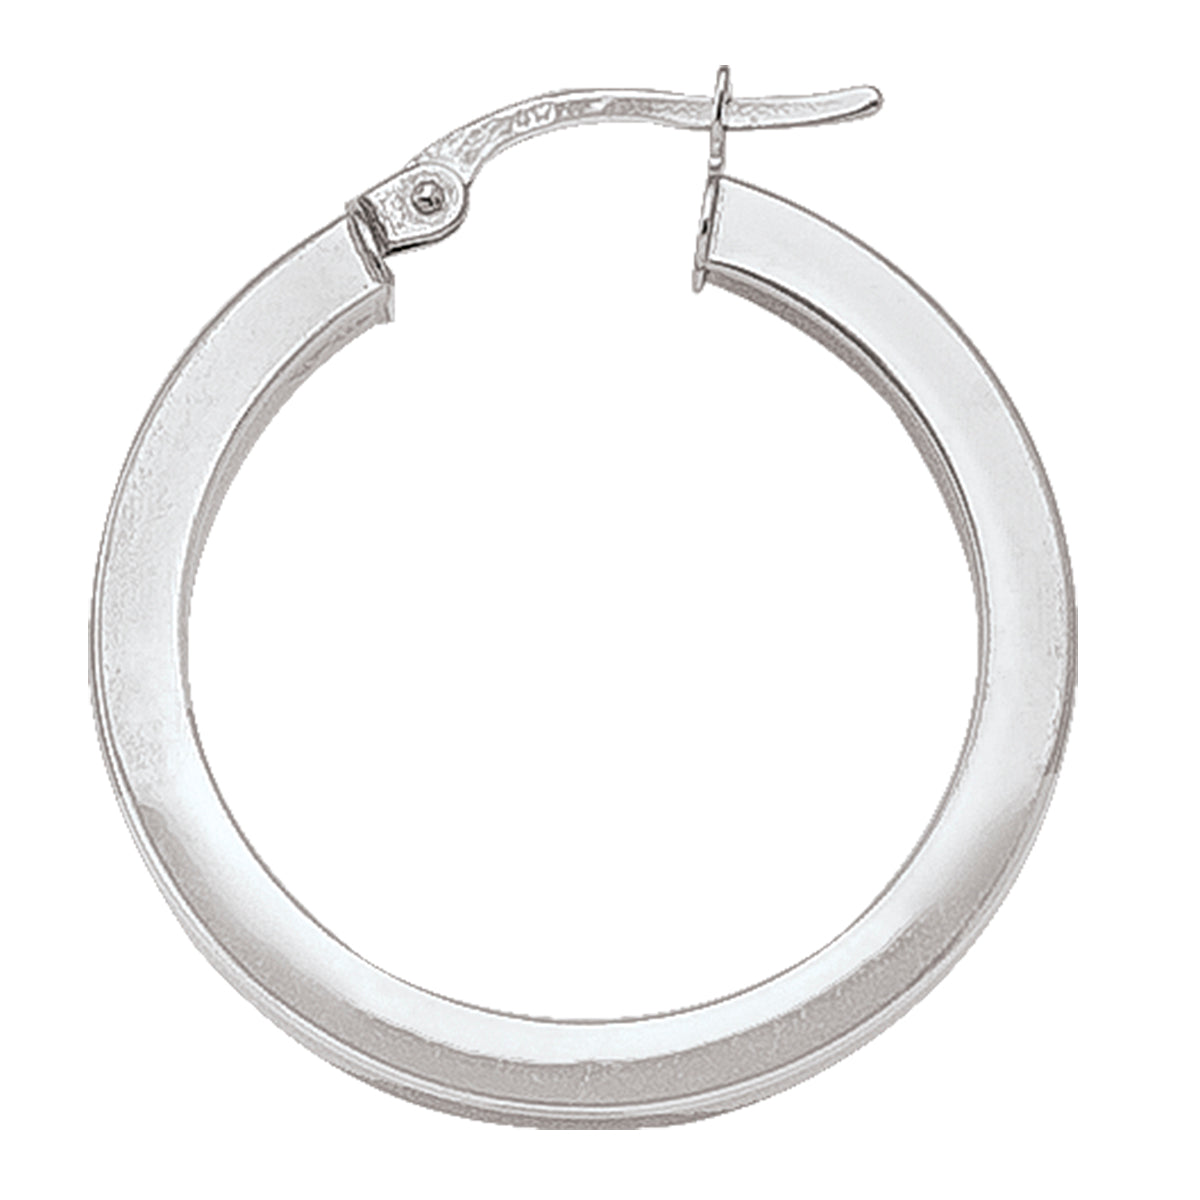 Square white gold hoop earrings with a 24.6mm size and 2.5mm wide tube, available in 10k, 14k, and 18k, featuring a polished finish.